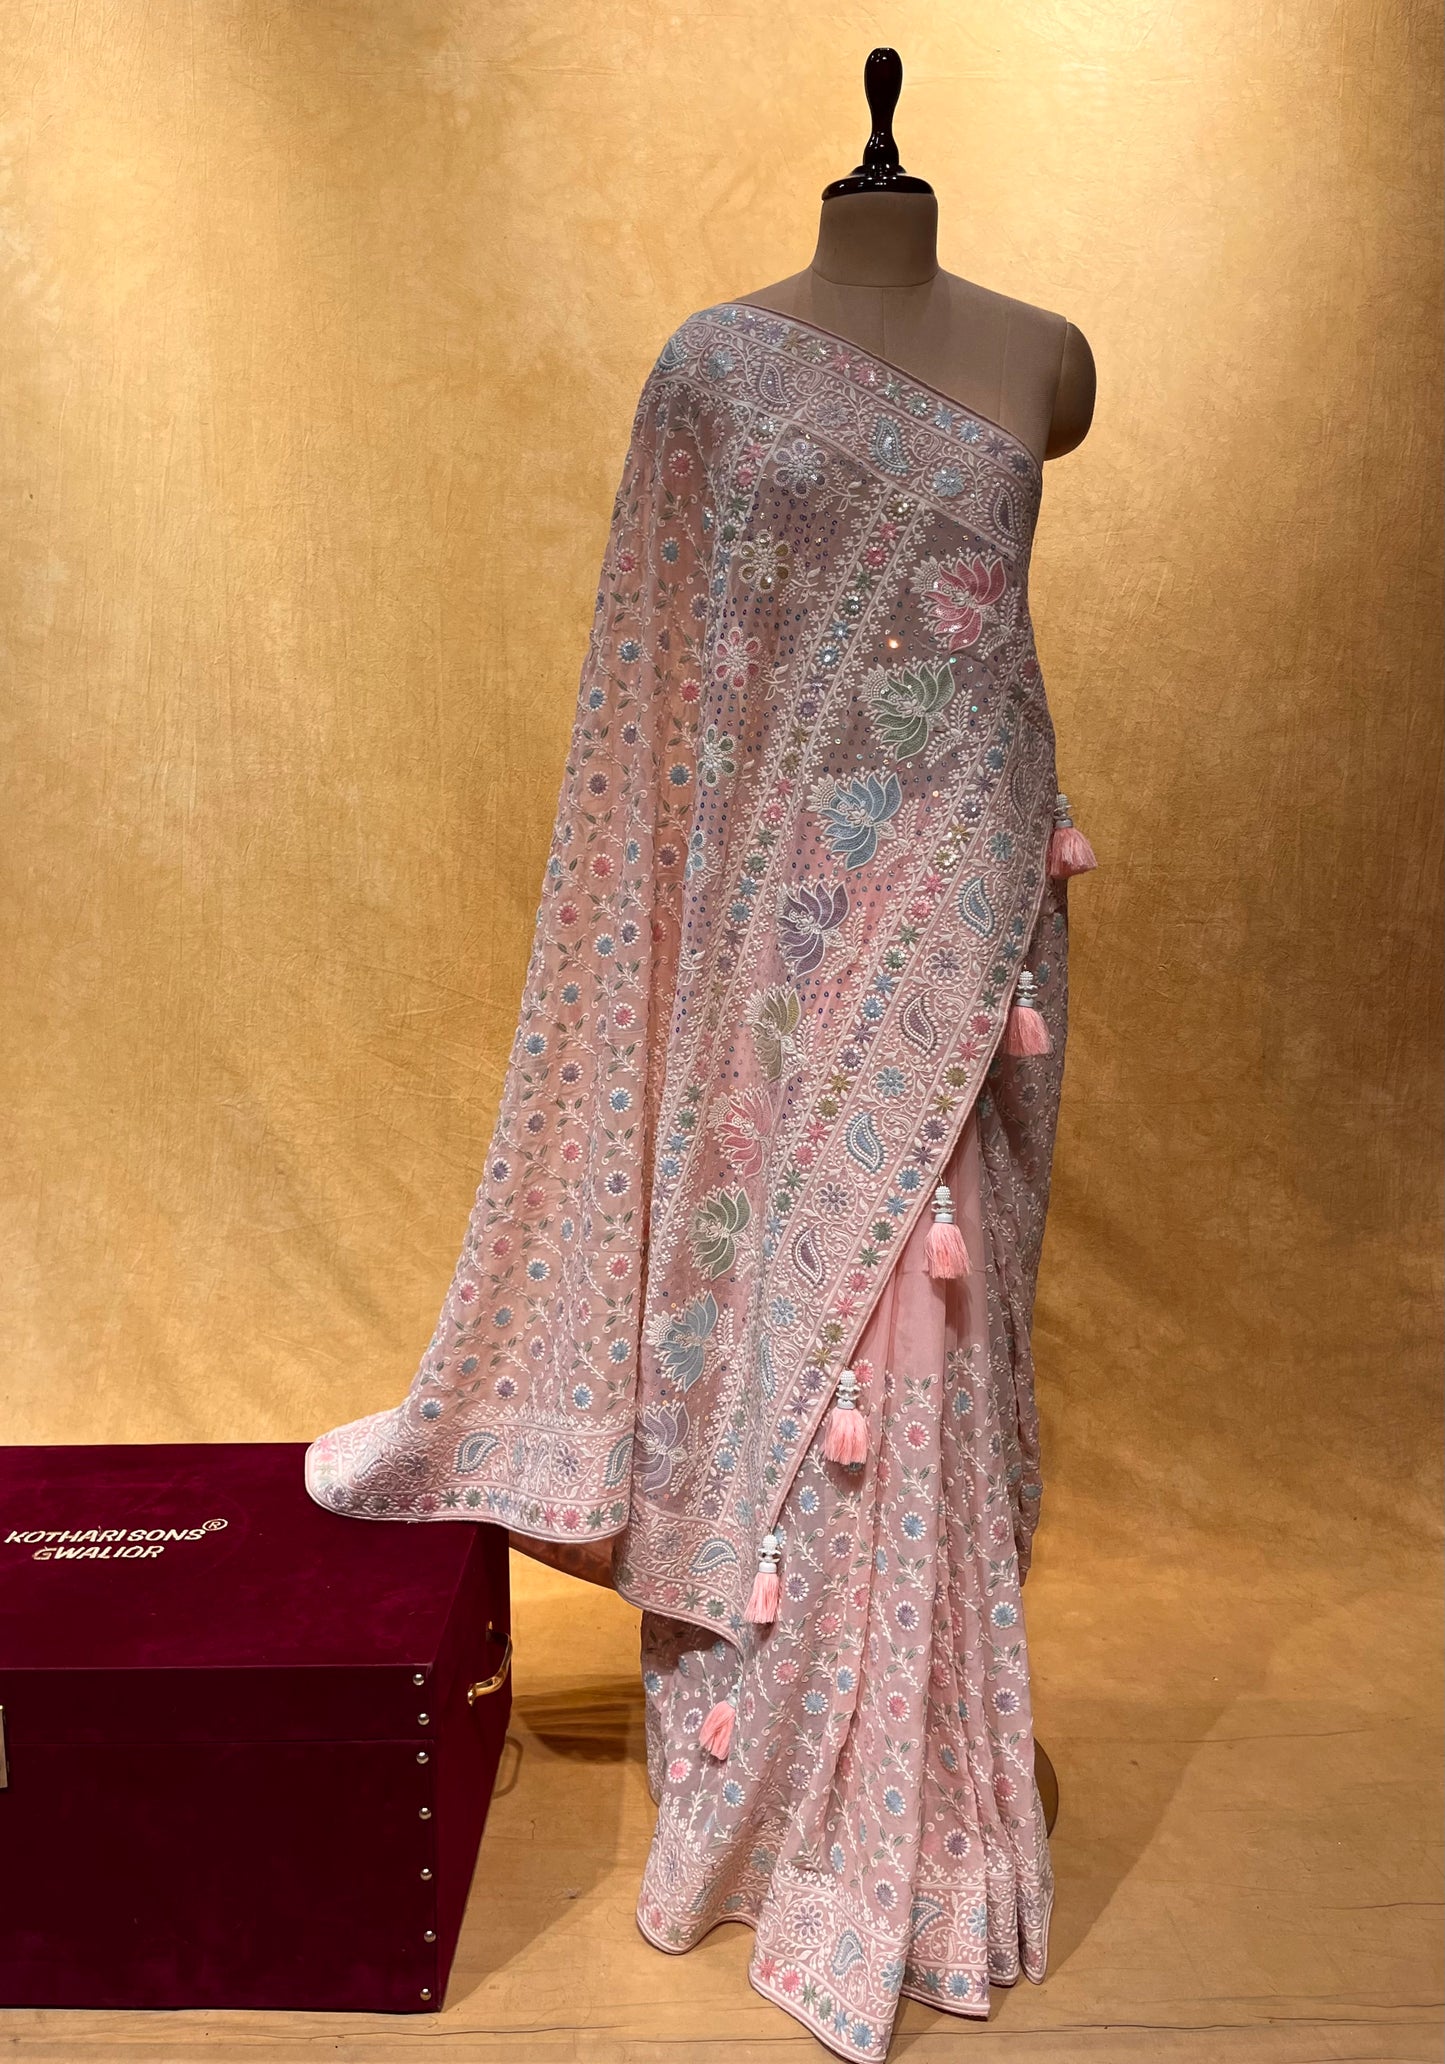 PINK COLOR CHIKANKARI EMBROIDERED SAREE EMBELLISHED WITH SEQUINS & THREAD WORK ( PINK CHIKAN SAREE )